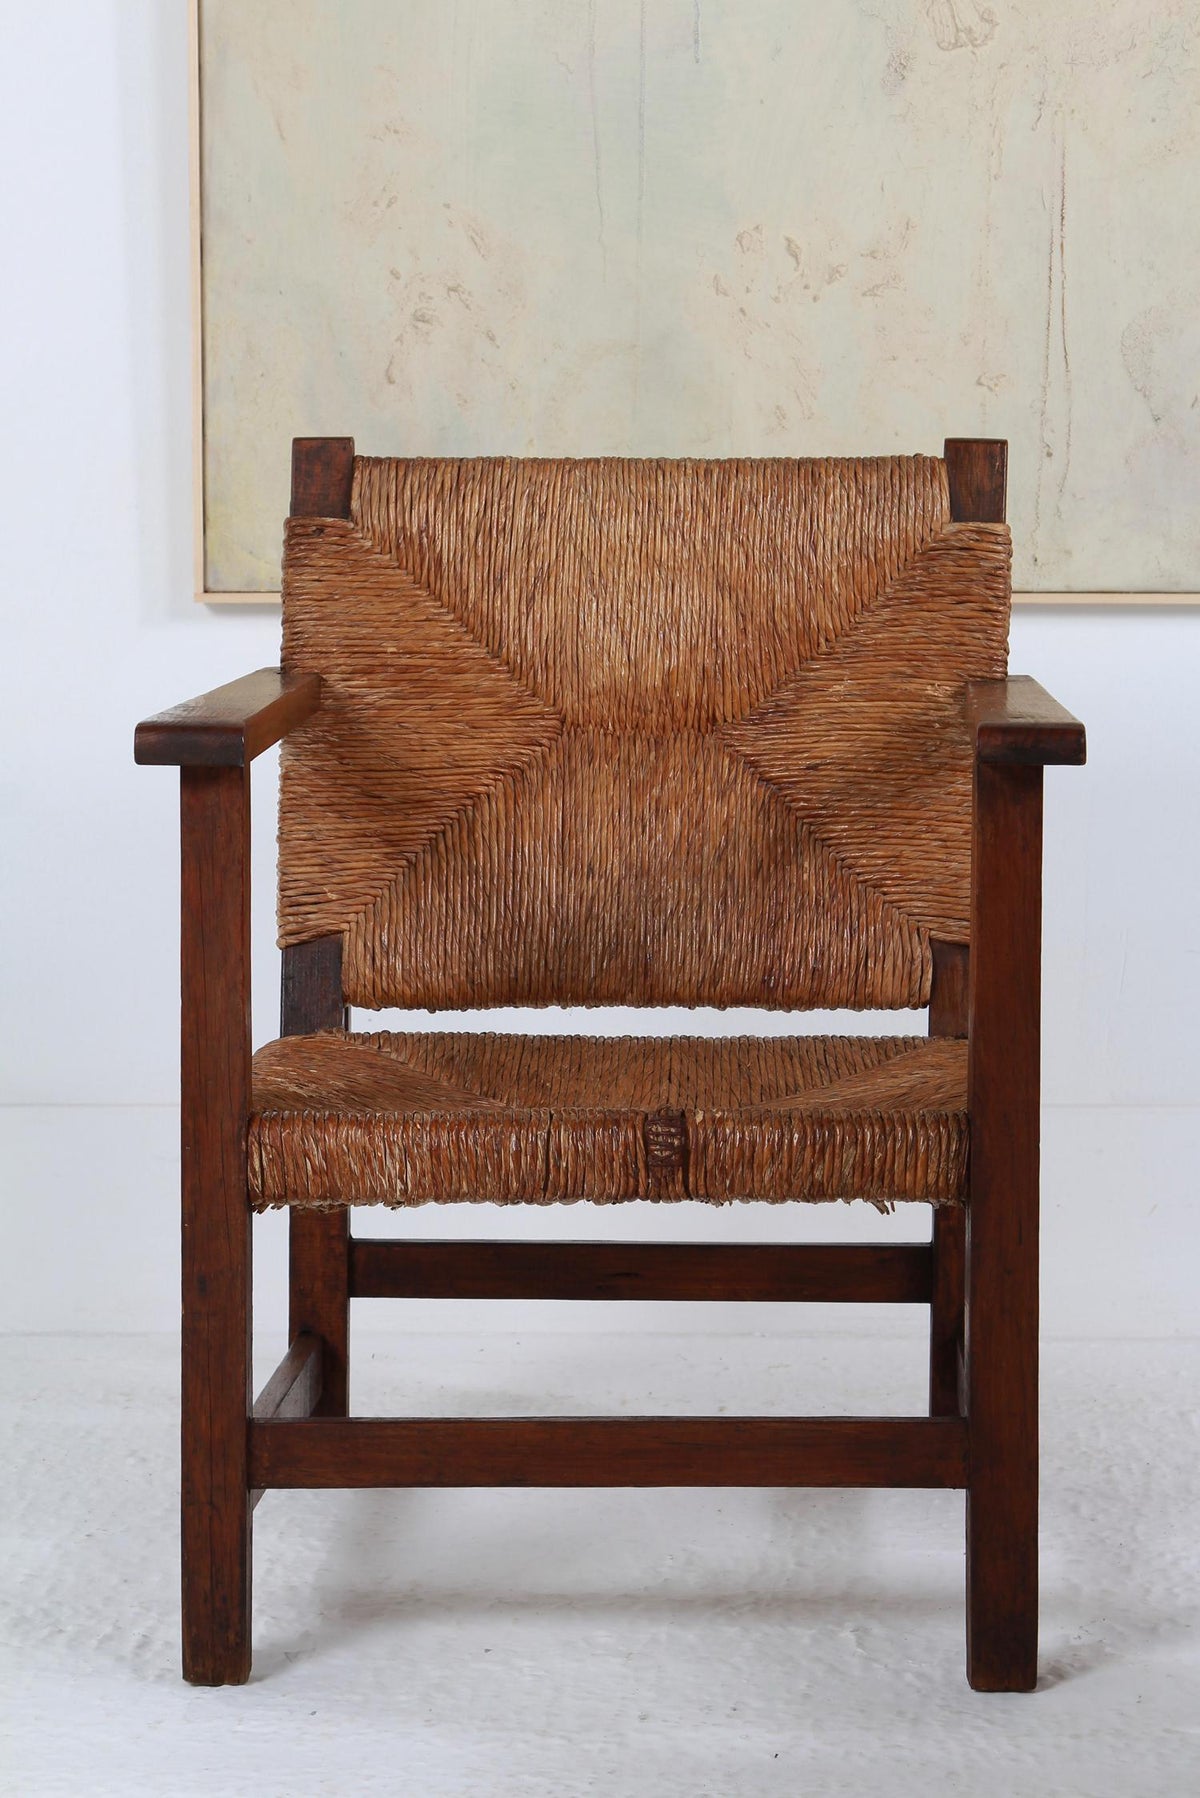 Pair of Rustic Spanish Lounge Chairs in Wood and Straw